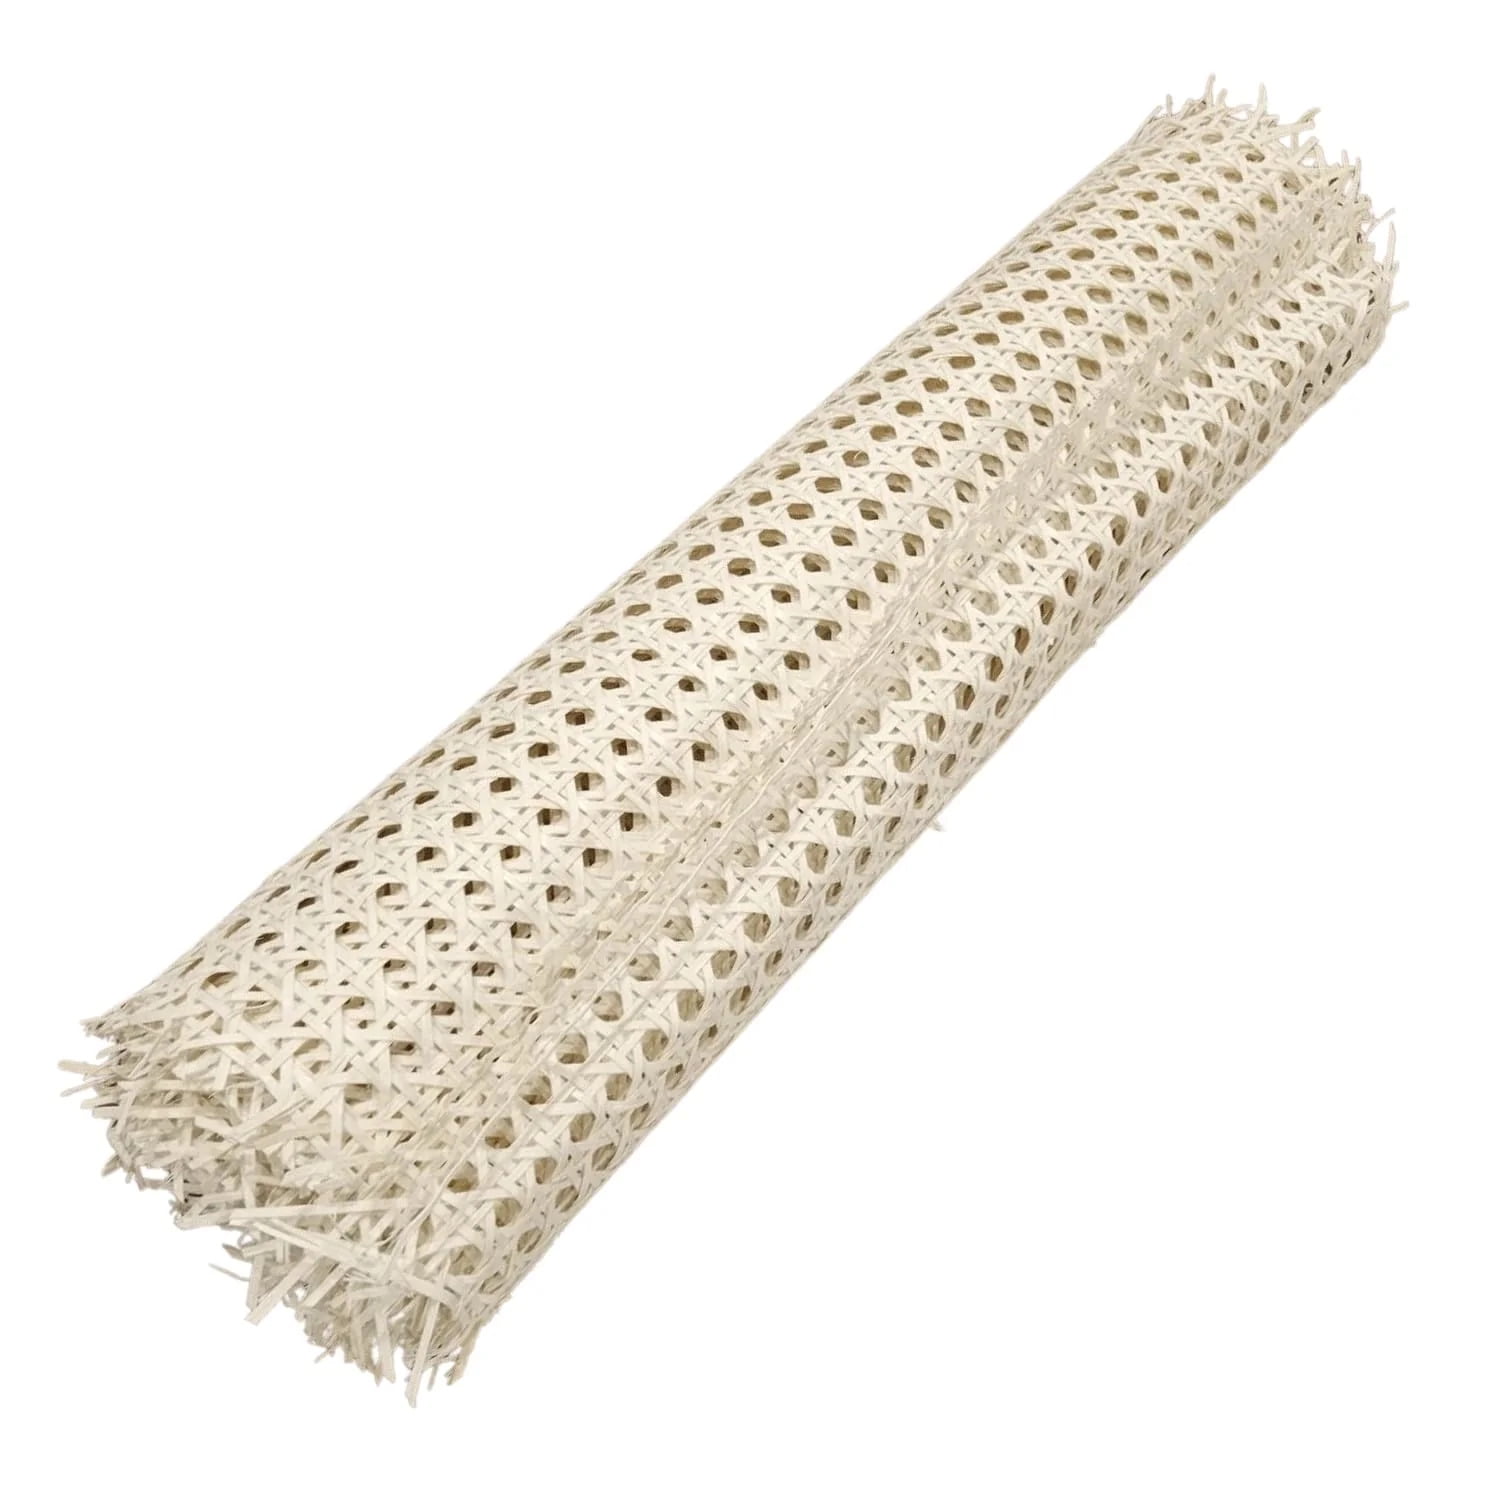 Rattan Webbing Roll Woven Open Mesh Cane Adjustable Caning Material for  Chair Ceiling Cabinet Furniture DIY Caning Projects - AliExpress